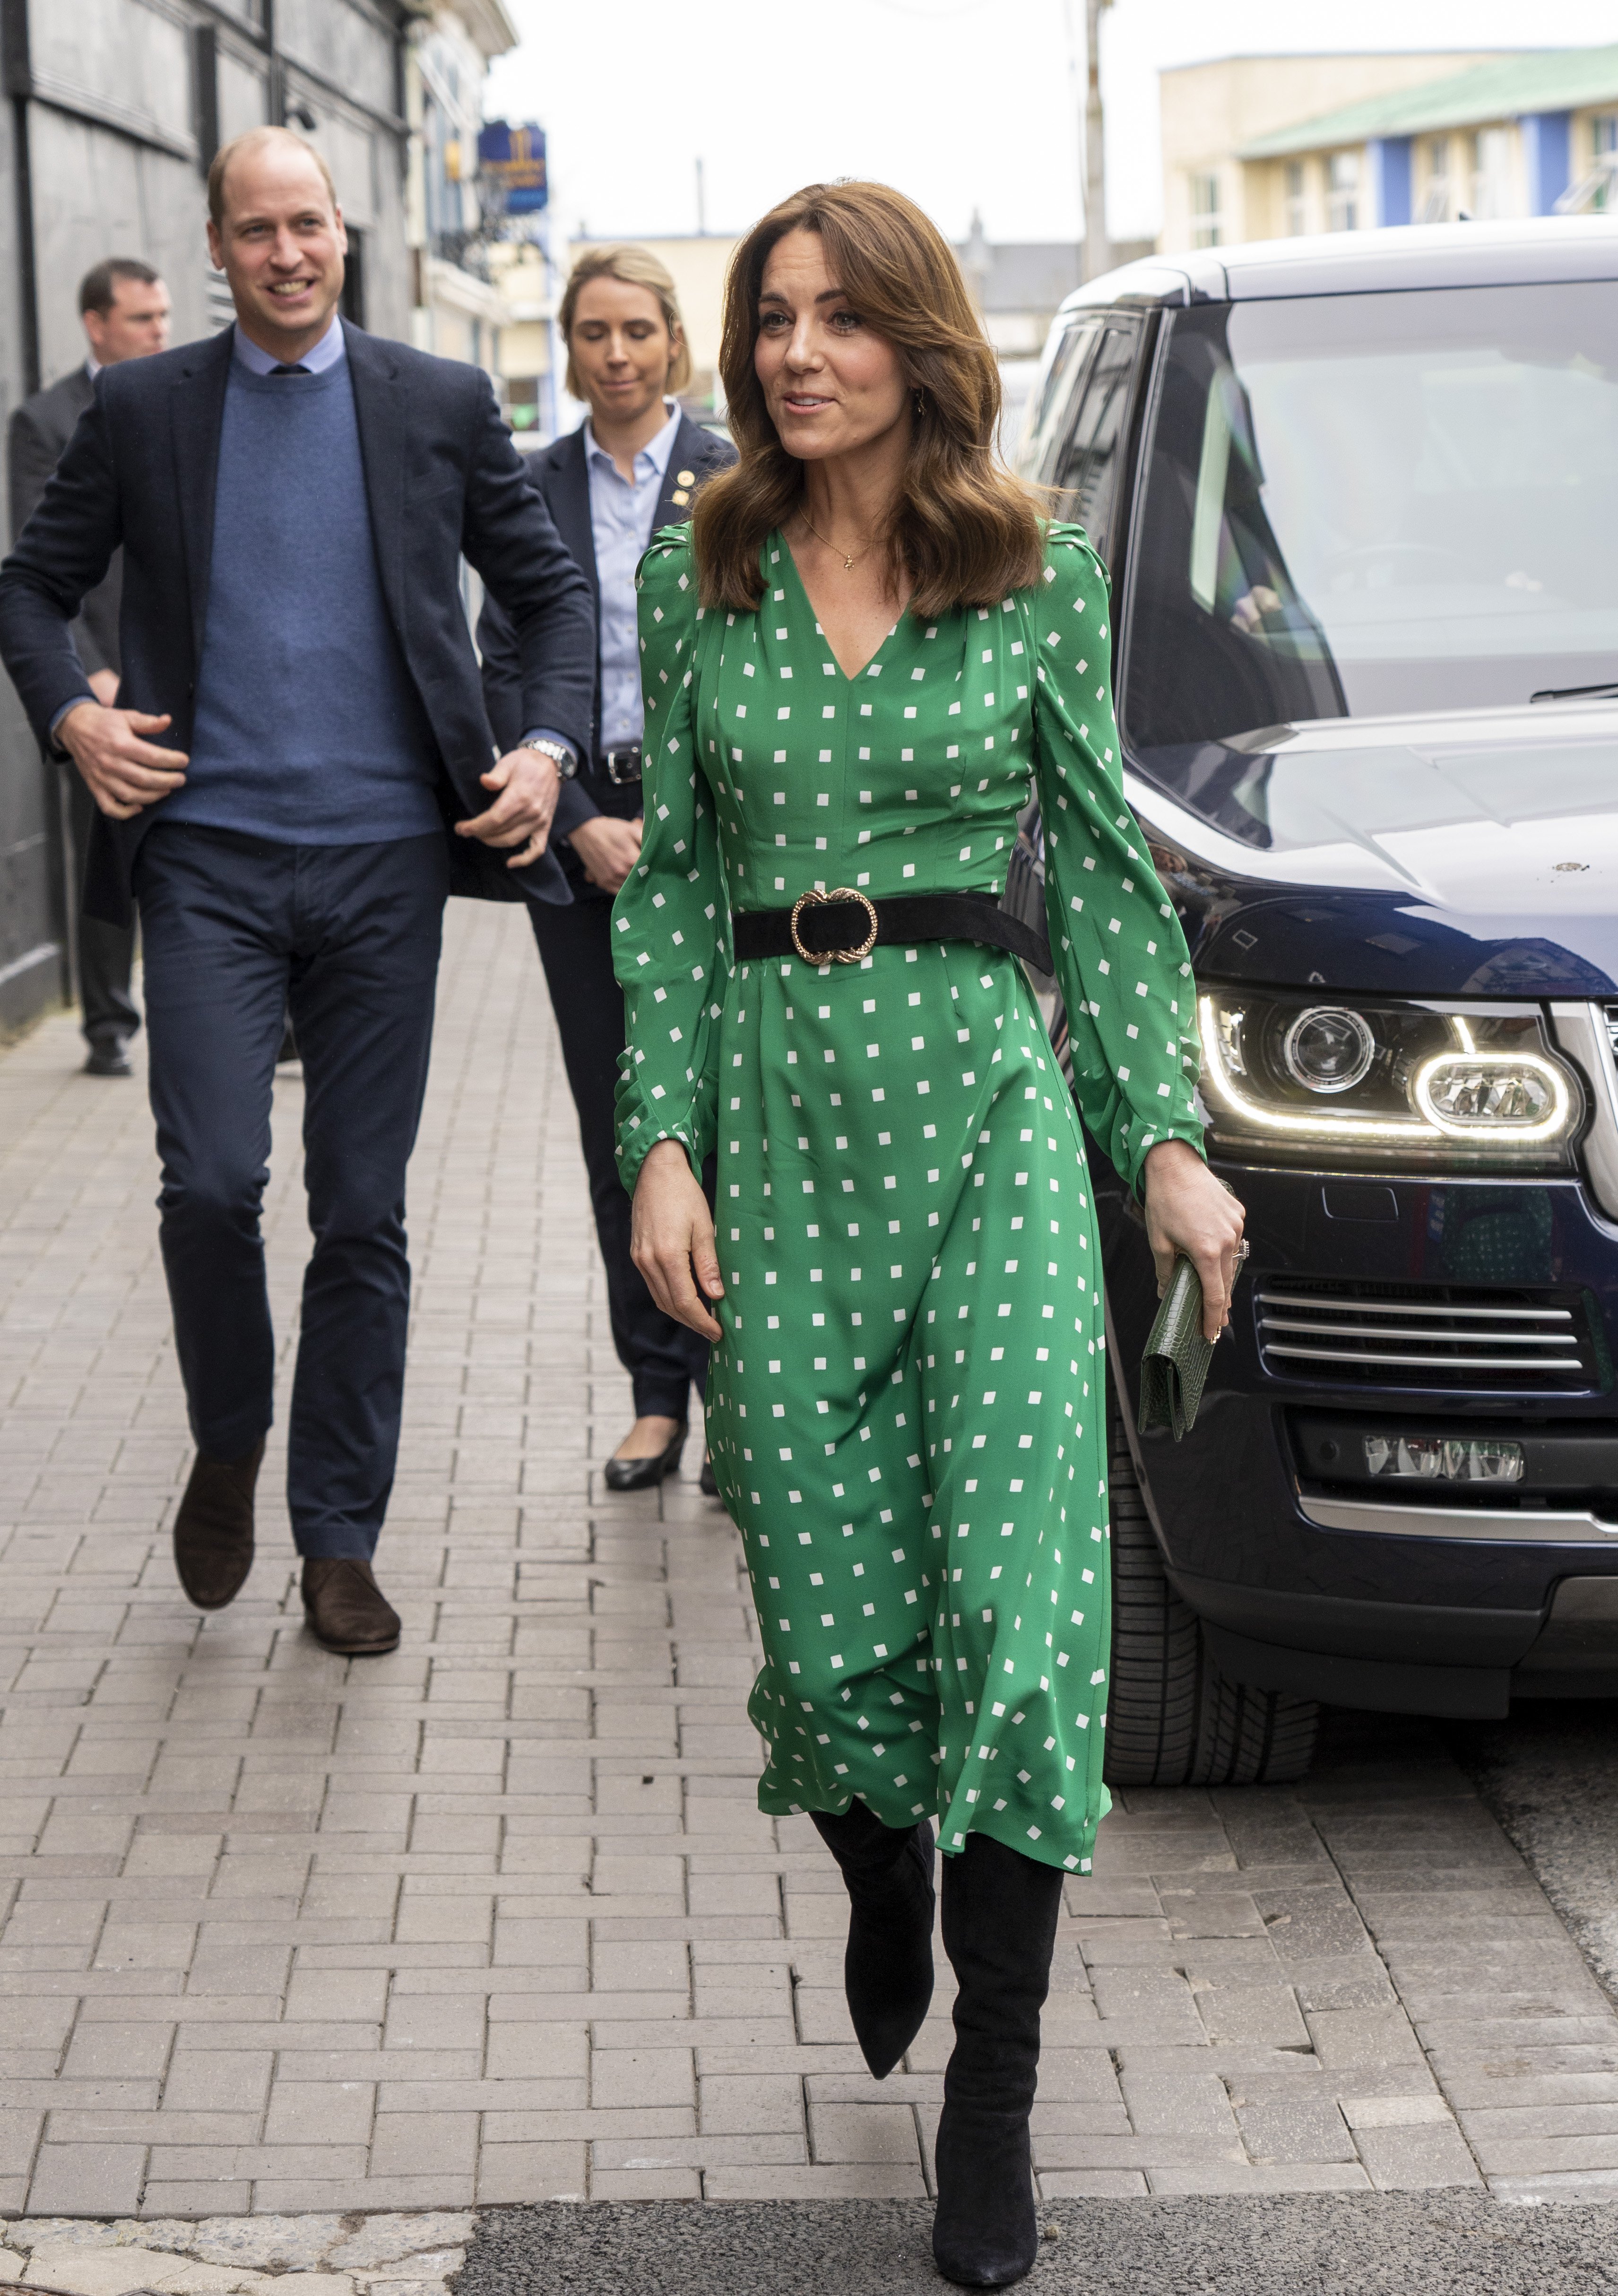 Prince William and Kate Middleton arrive at a traditional Irish pub in Galway on March 5, 2020, in Galway, Ireland.| Source: Getty Images